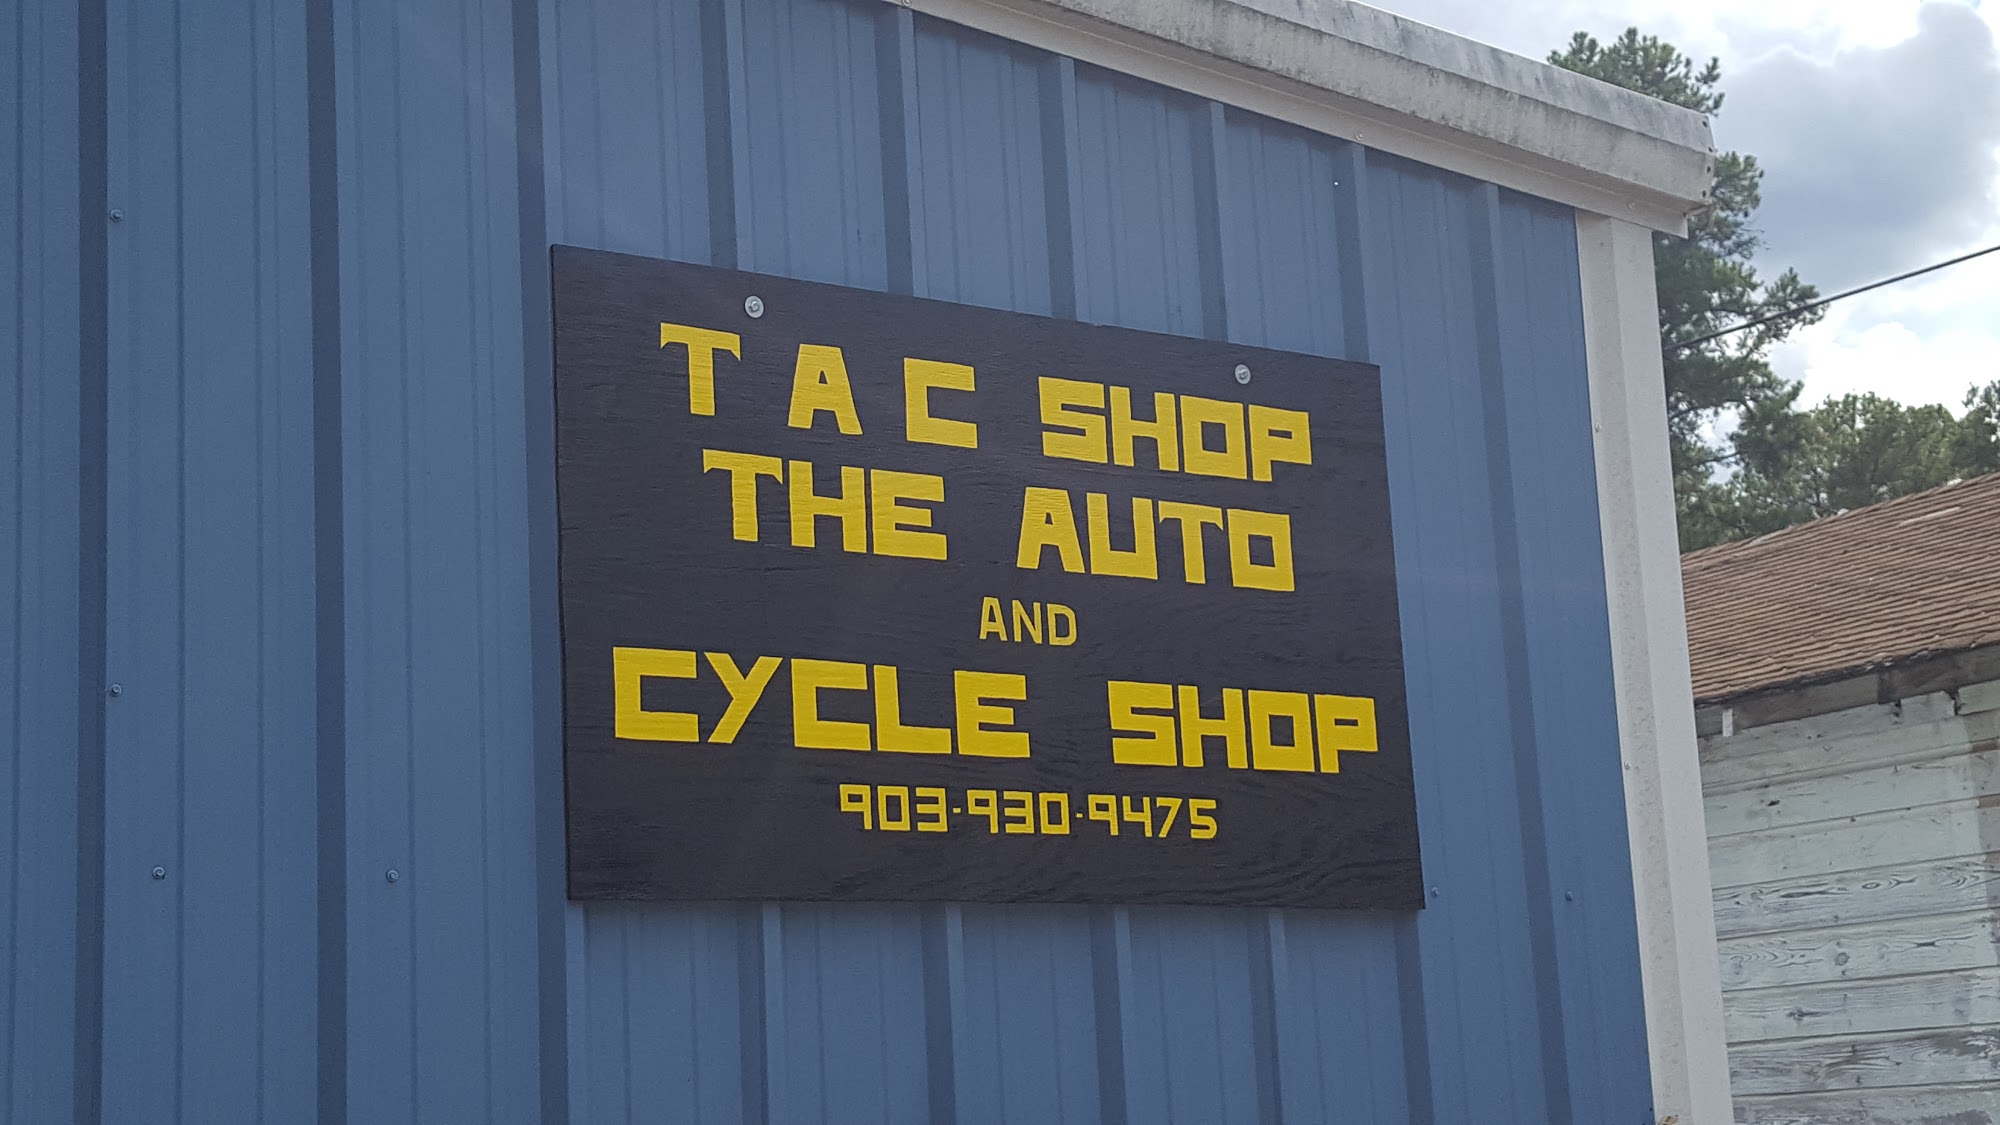 The Auto and Cycle shop